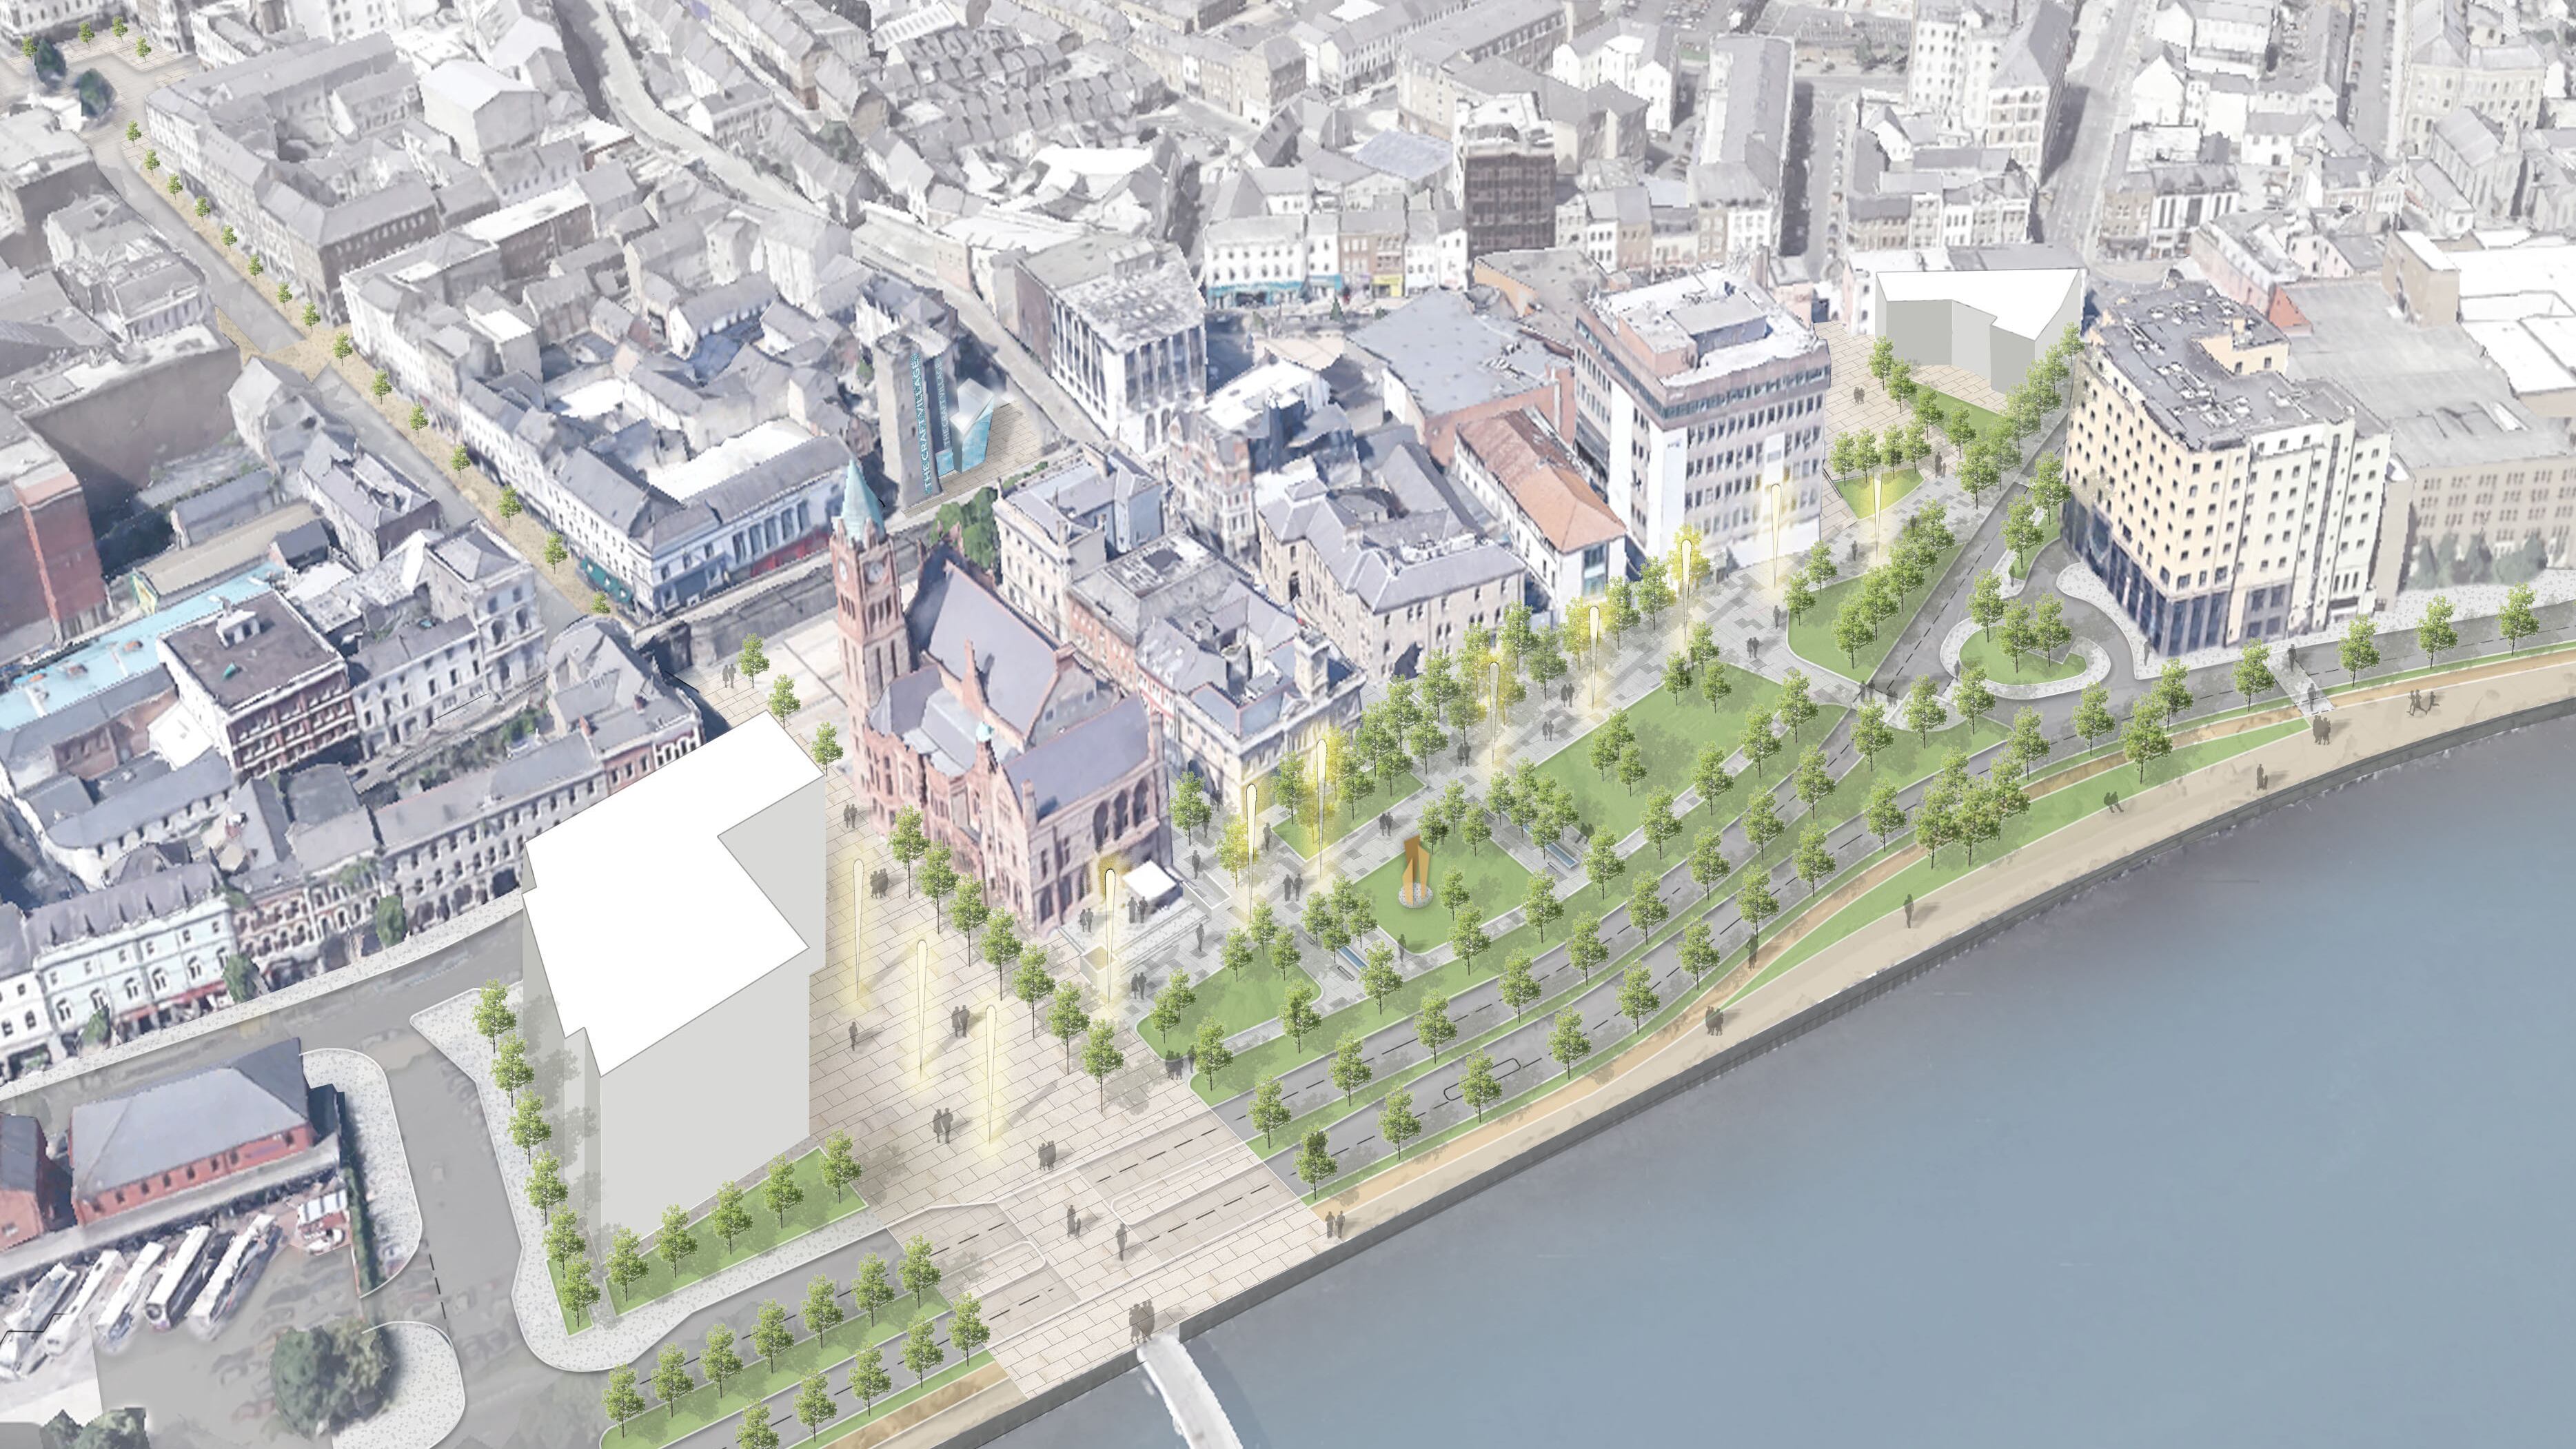 Councillors were shown an artist's impression of how the Queen's Quay area could be transformed under the new plans.